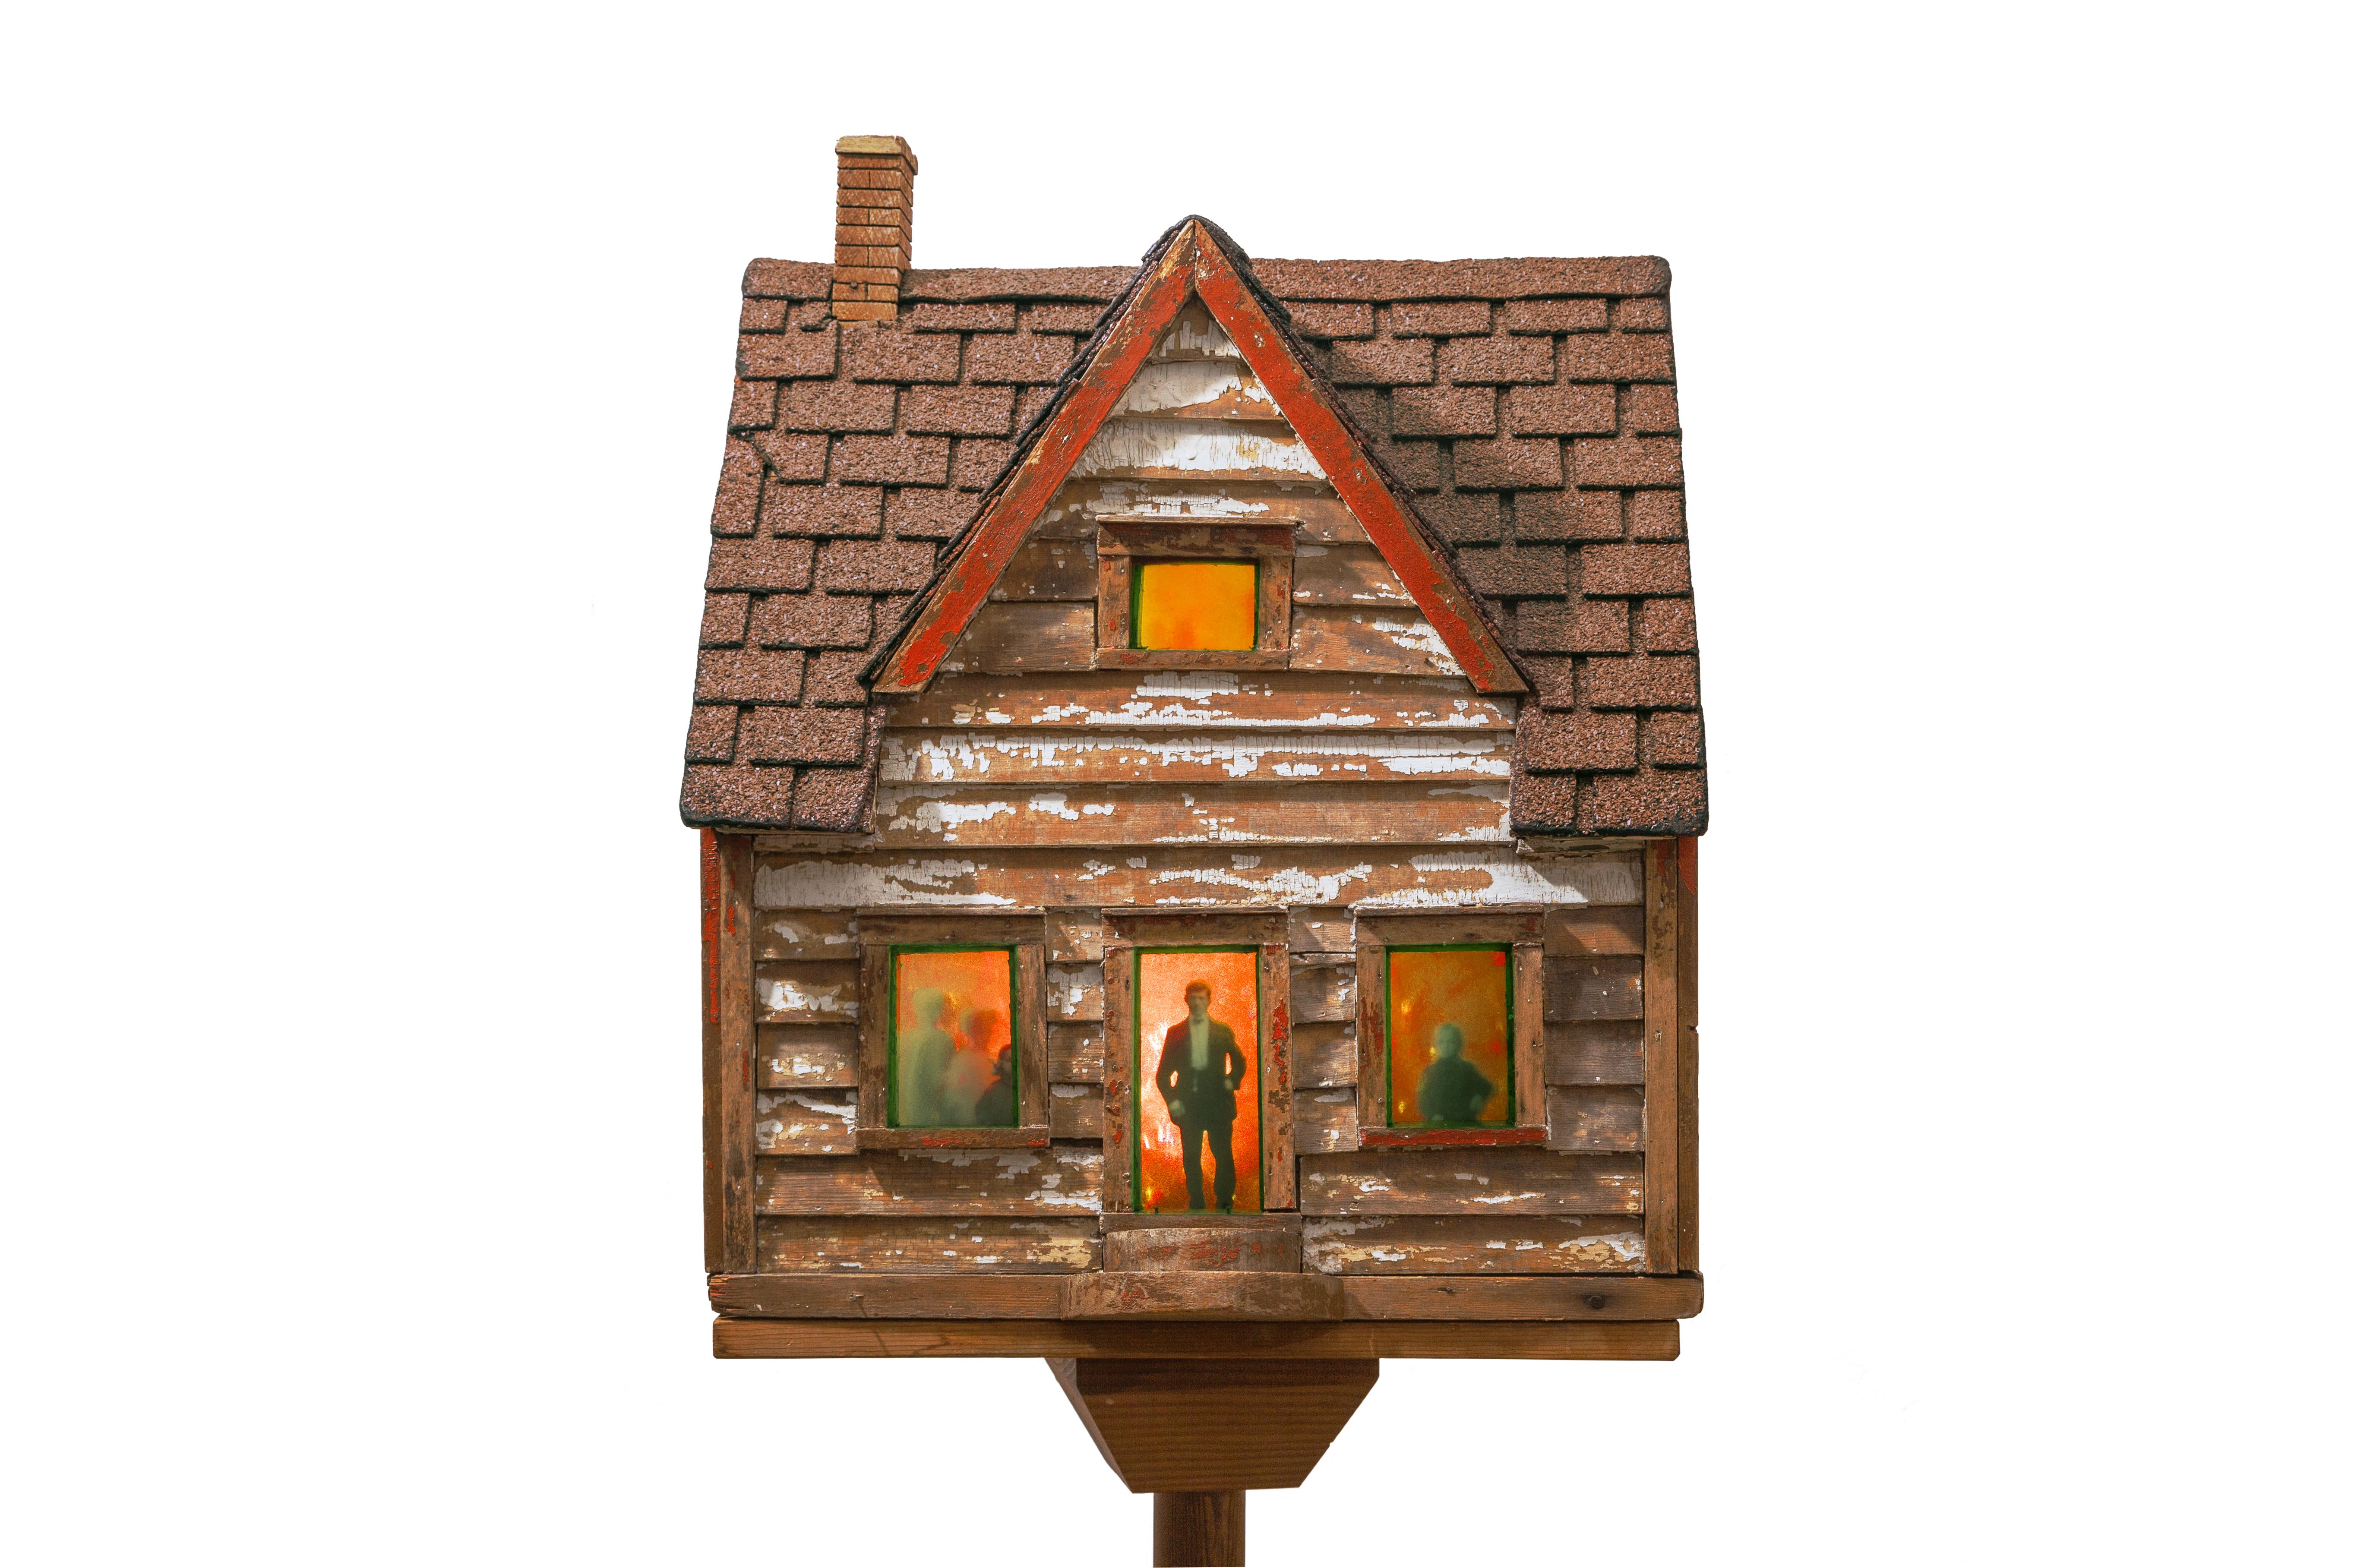 Antique architectural model, acrylic, and photographs with external light source.

Artist statement: 
